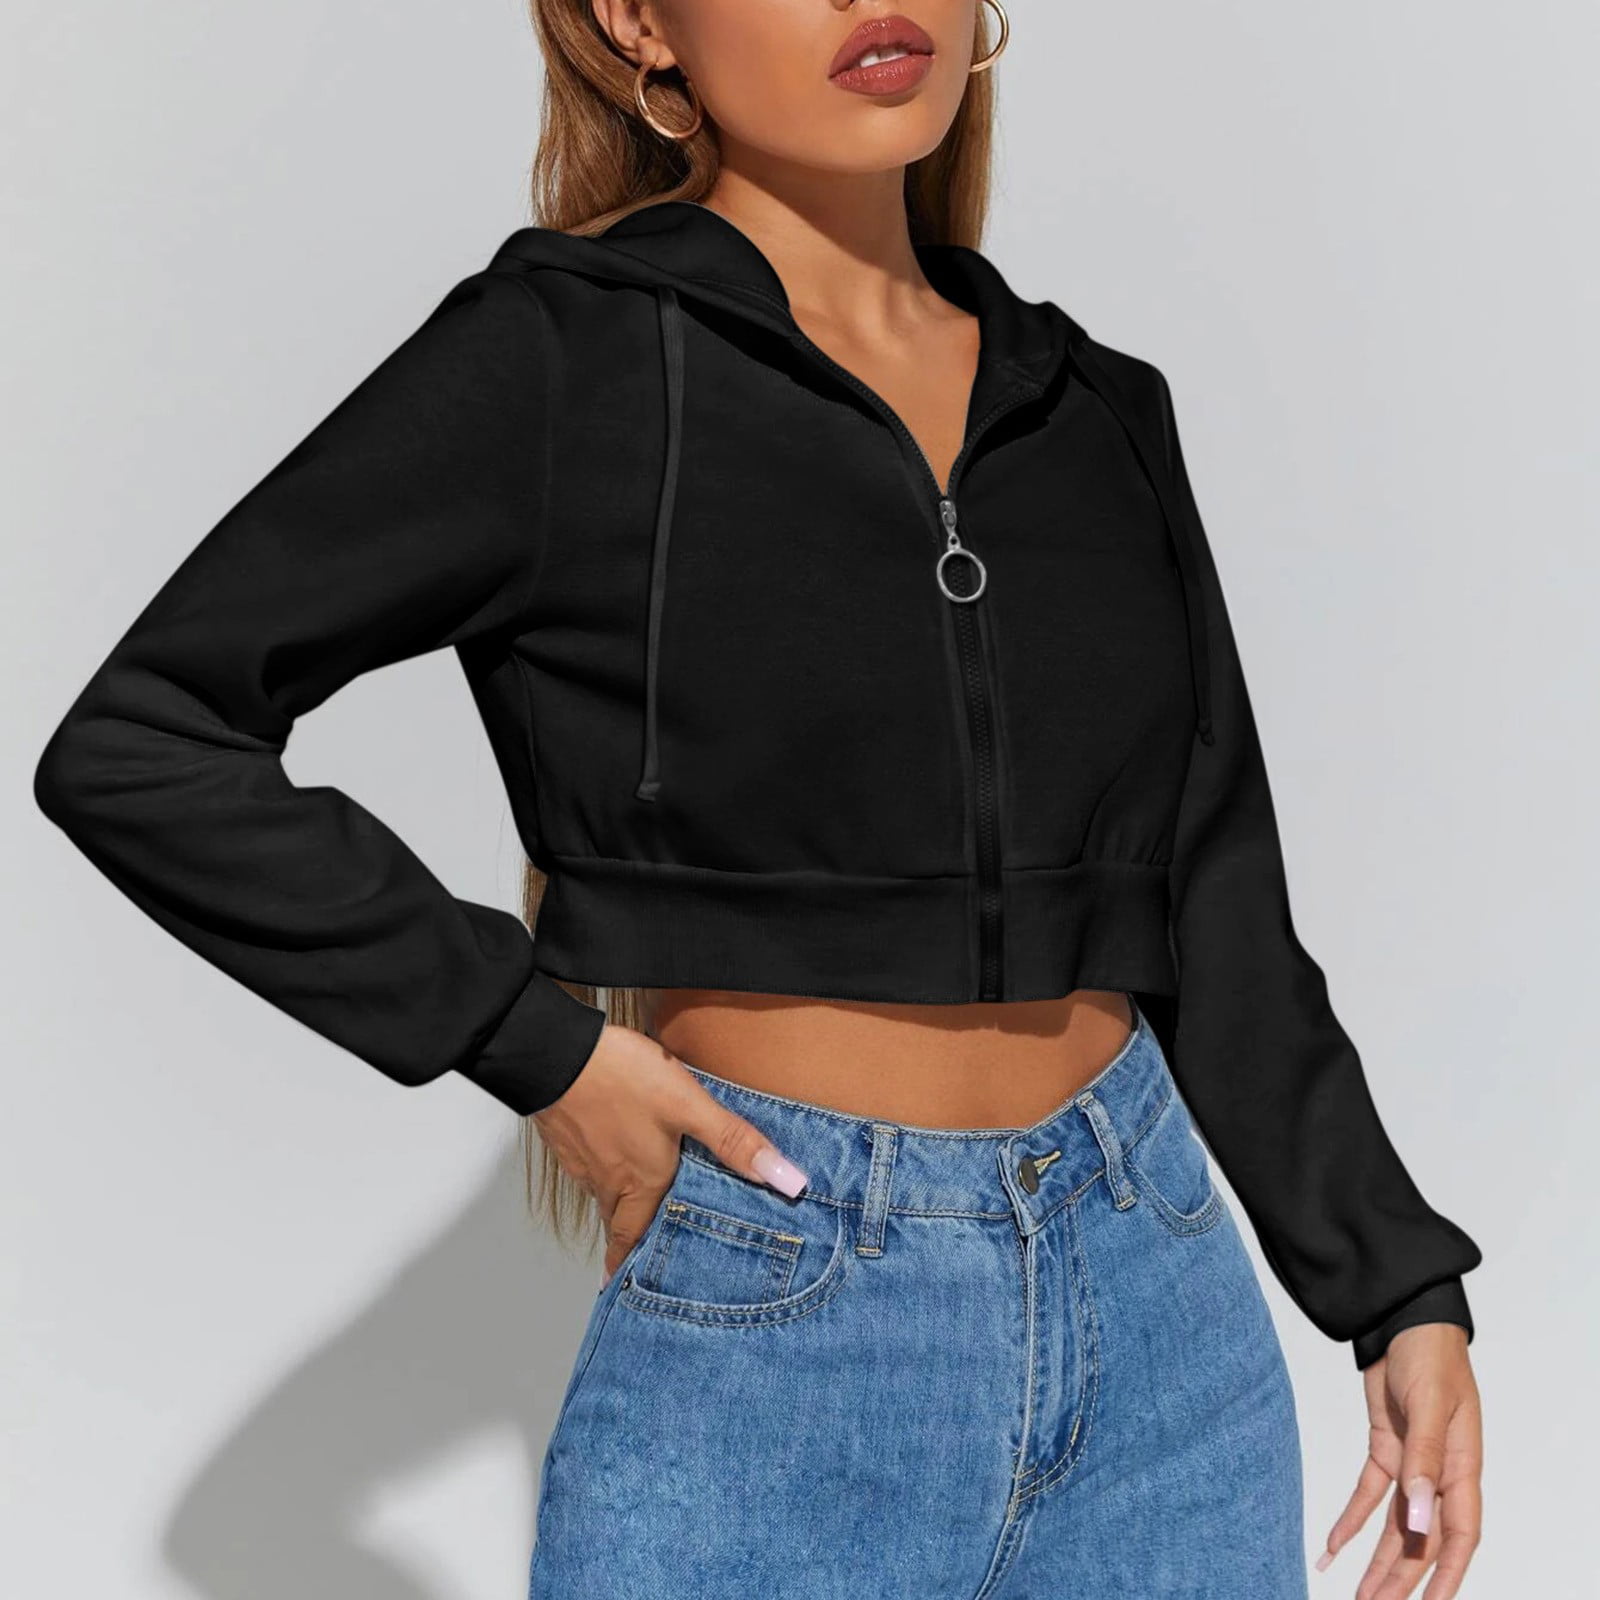 adviicd Fashion Oversized Hoodies Women's Cropped Hoodie Long Sleeves Crop  Tops with Hooded